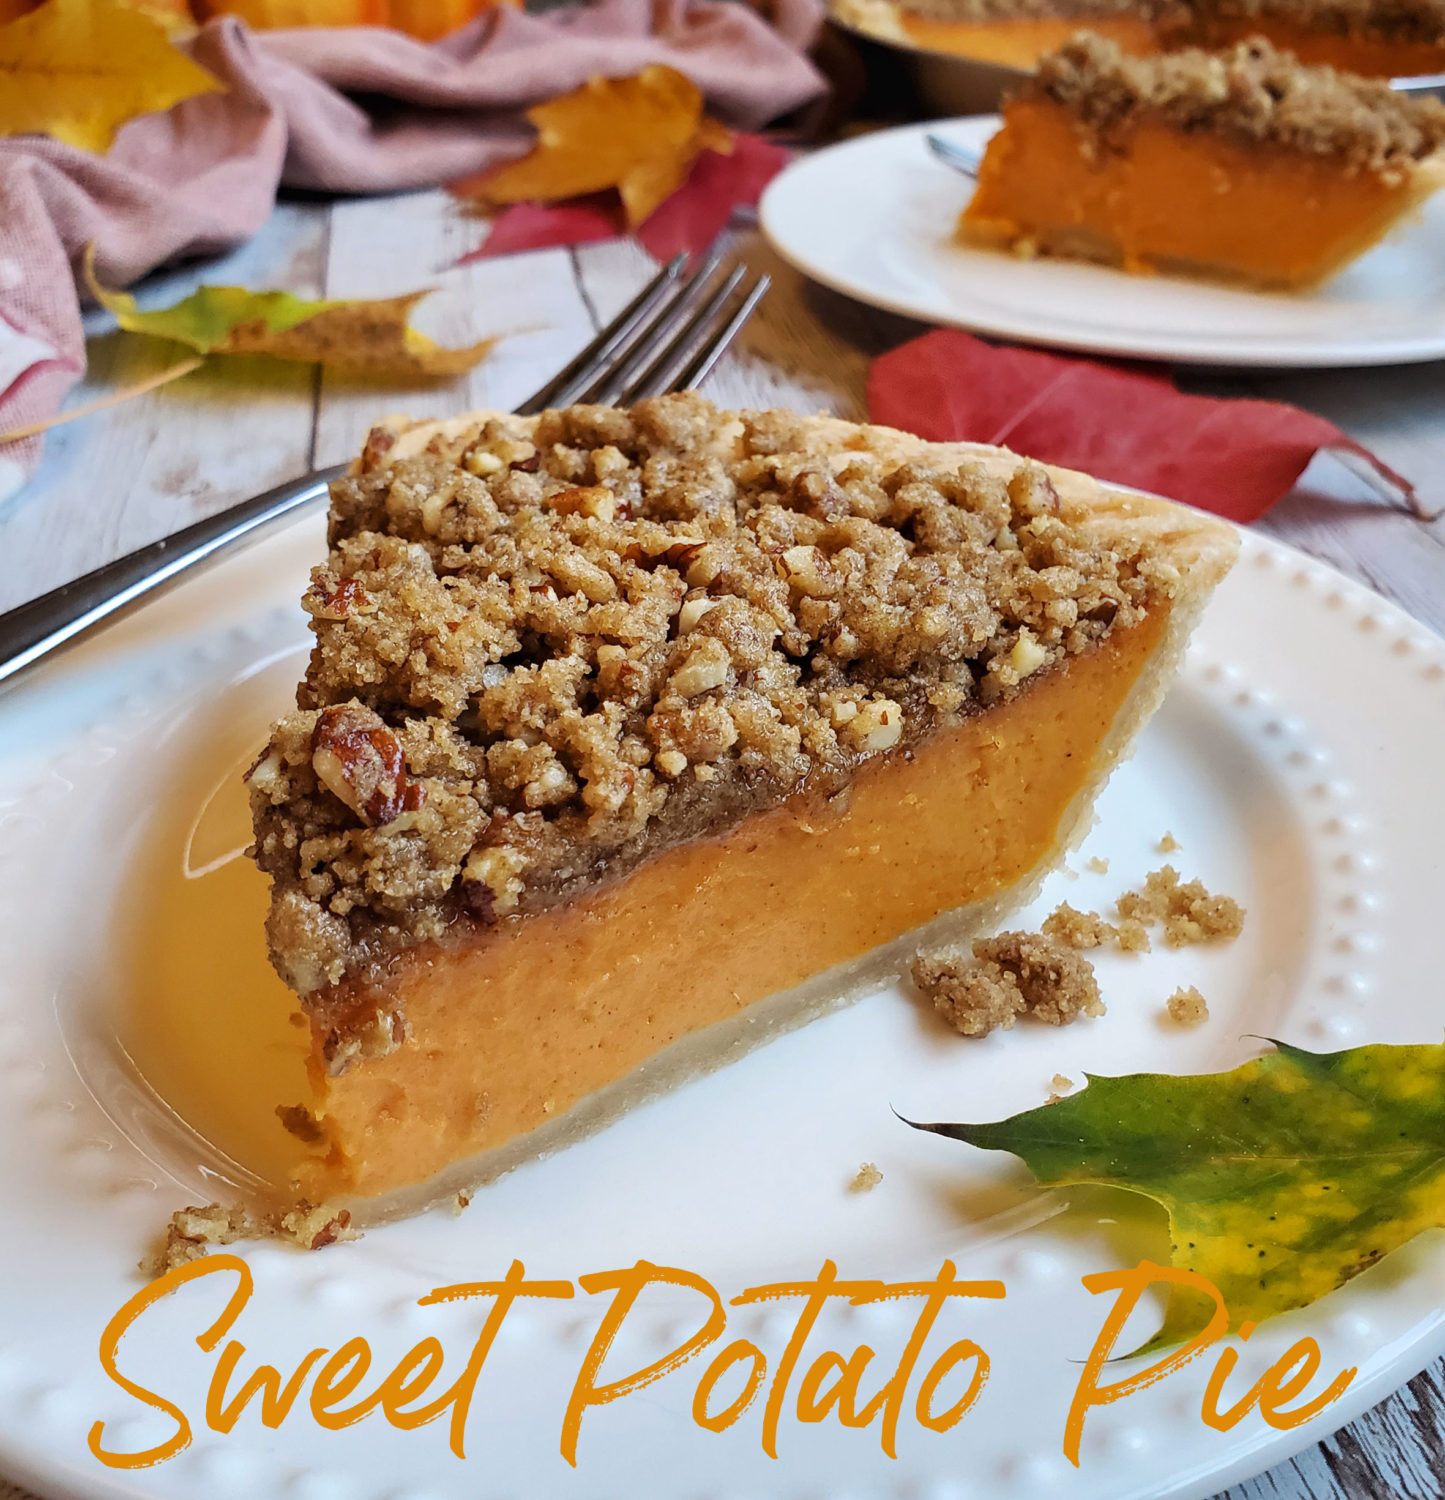 Autumn sweet potatoes with sugar, spices, baked to perfection with a golden brown sugar praline topping baked in Grandma's ultra flaky crust!